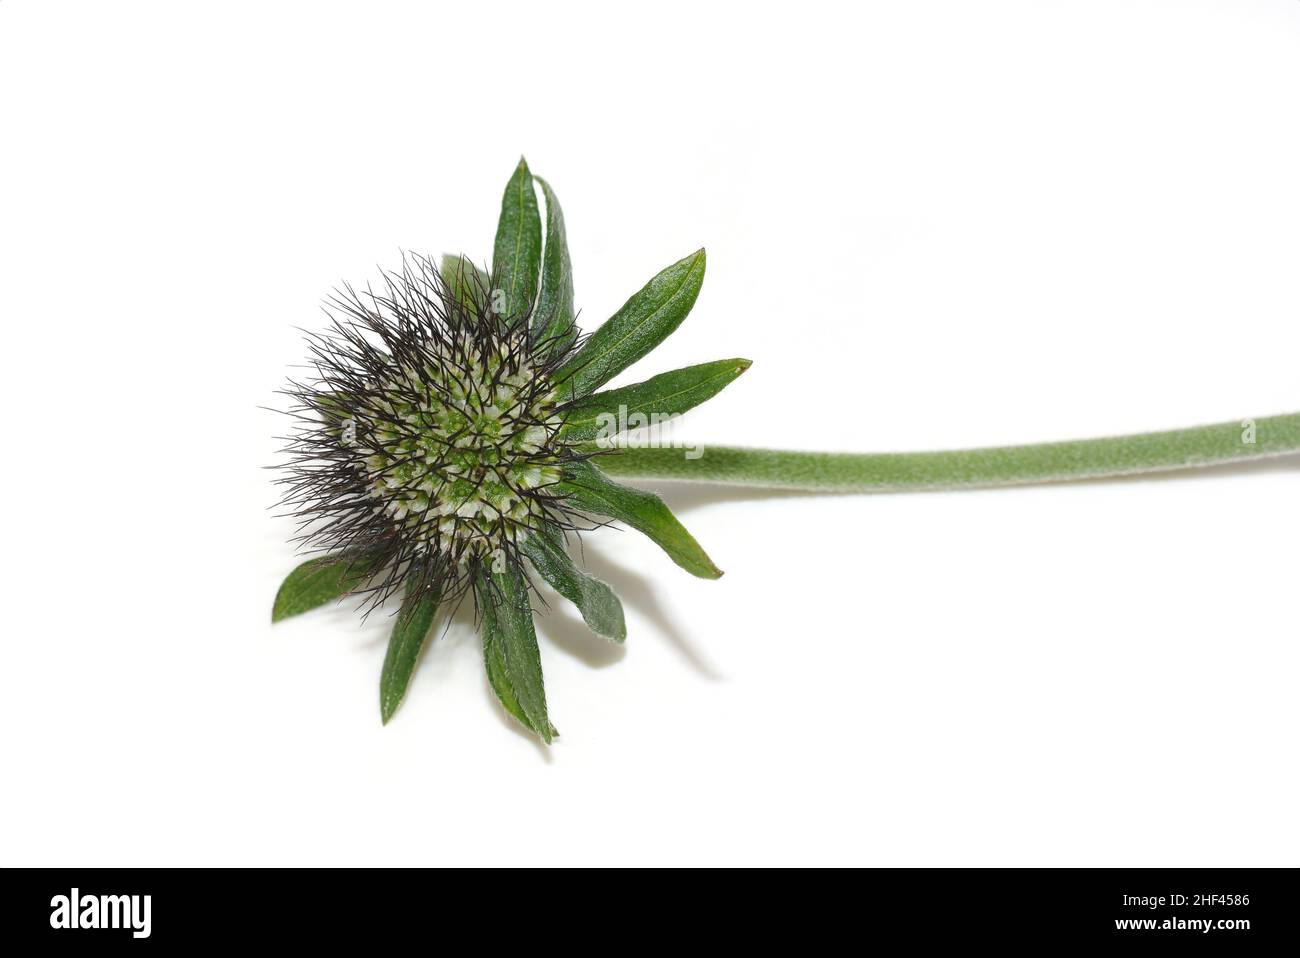 Flowered seed ball of scabiosa pincushion flower plant on white background Stock Photo